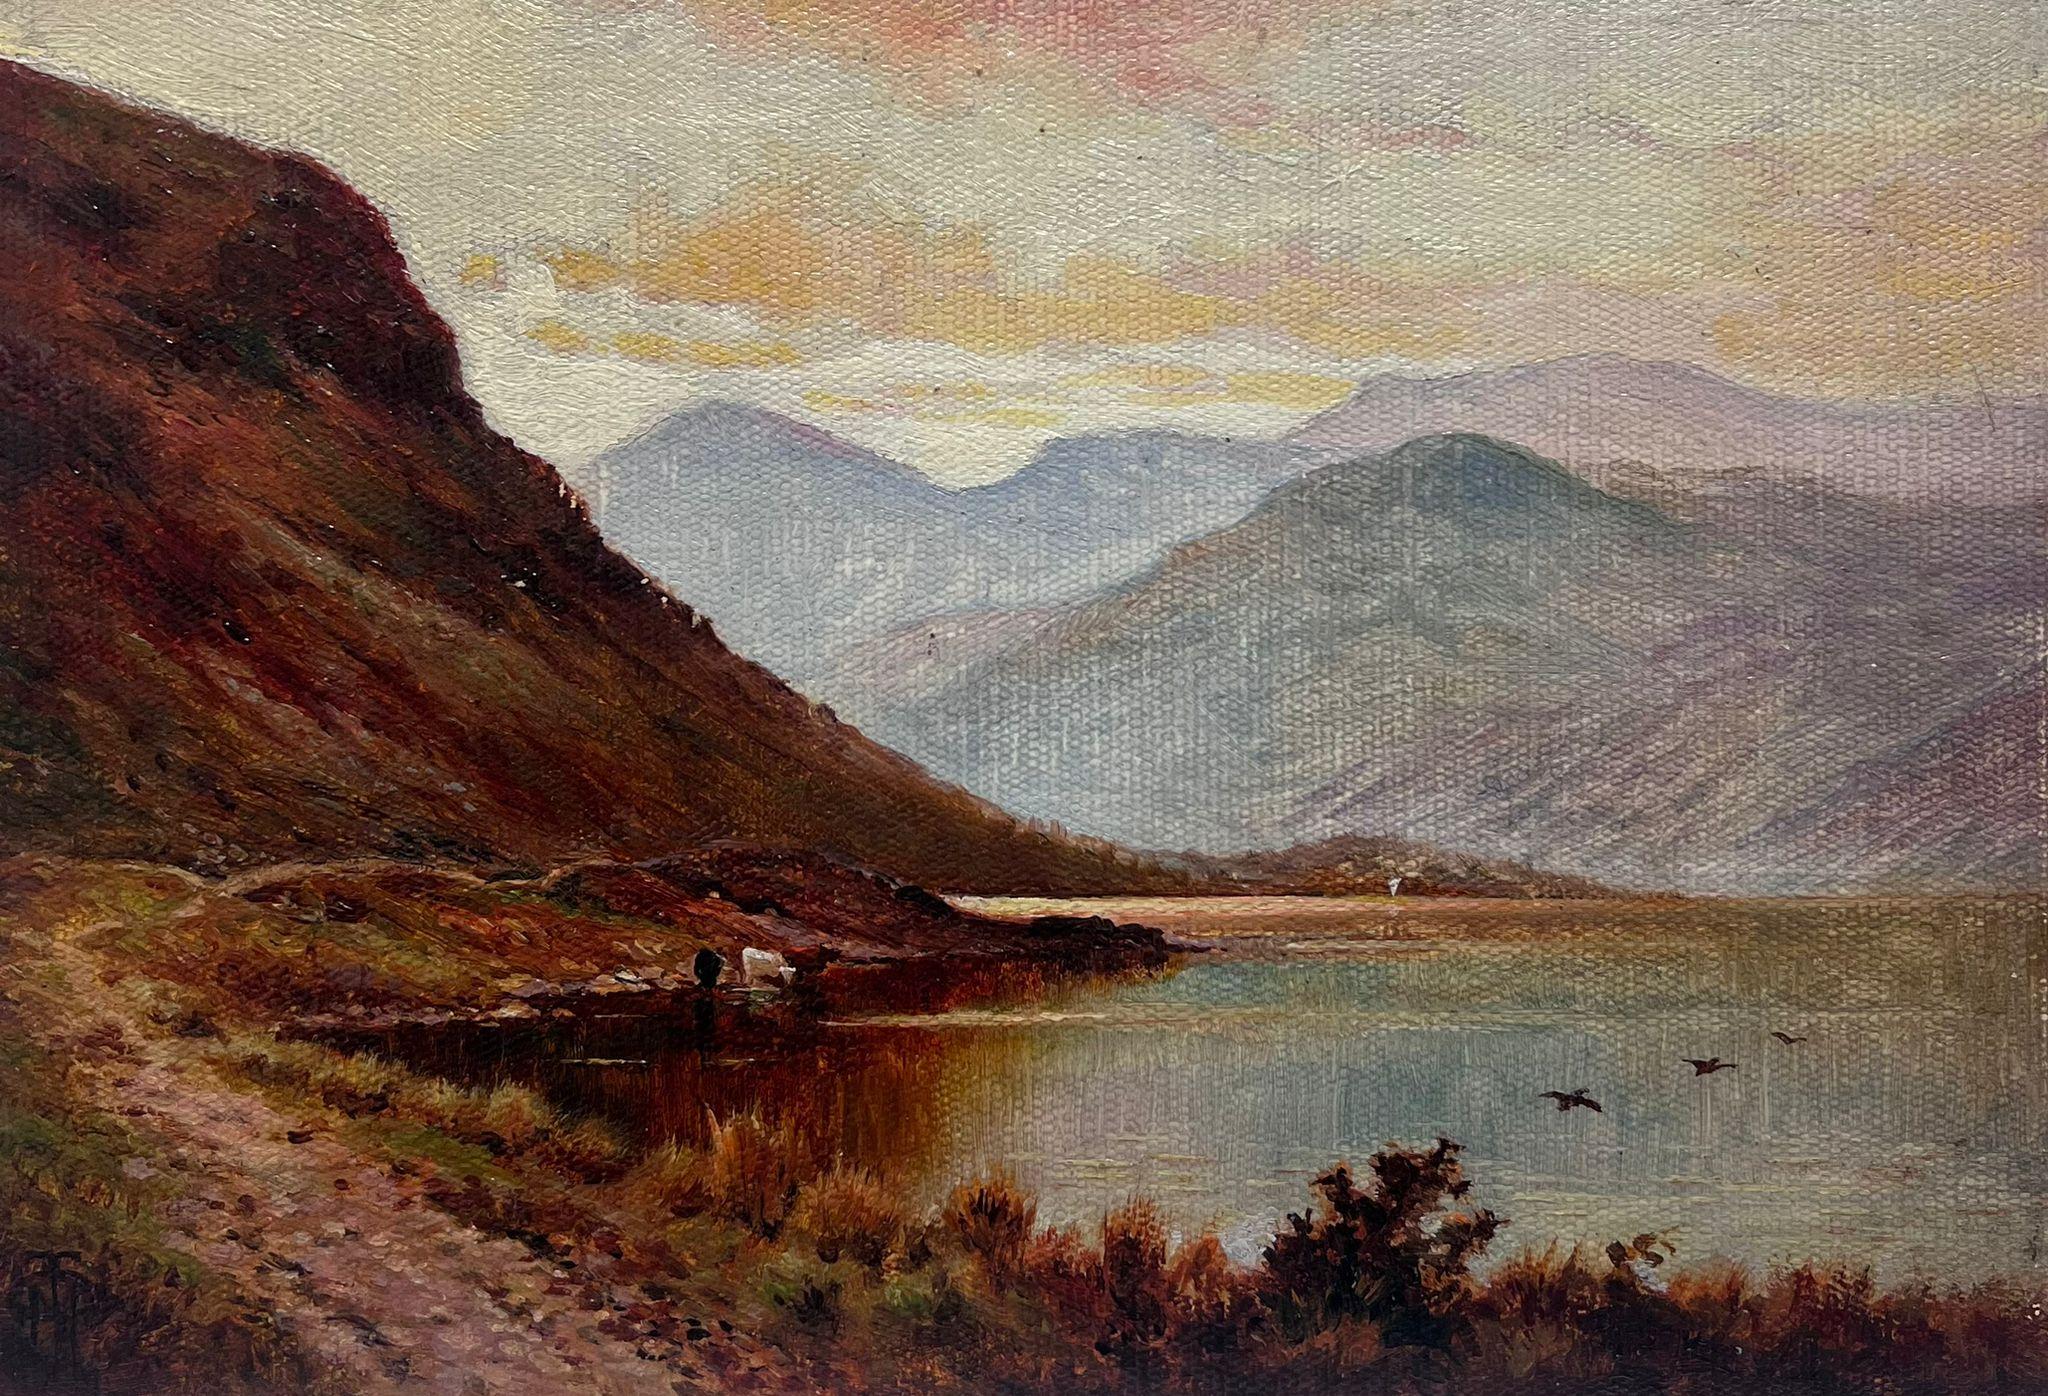 The Close of Day
Scottish Highland Loch at sunset with cattle watering
British School, early 20th century
signed initials lower left corner
oil on board, unframed
board: 7 x 10 inches
provenance: private collection, UK
condition:  minor scuffing